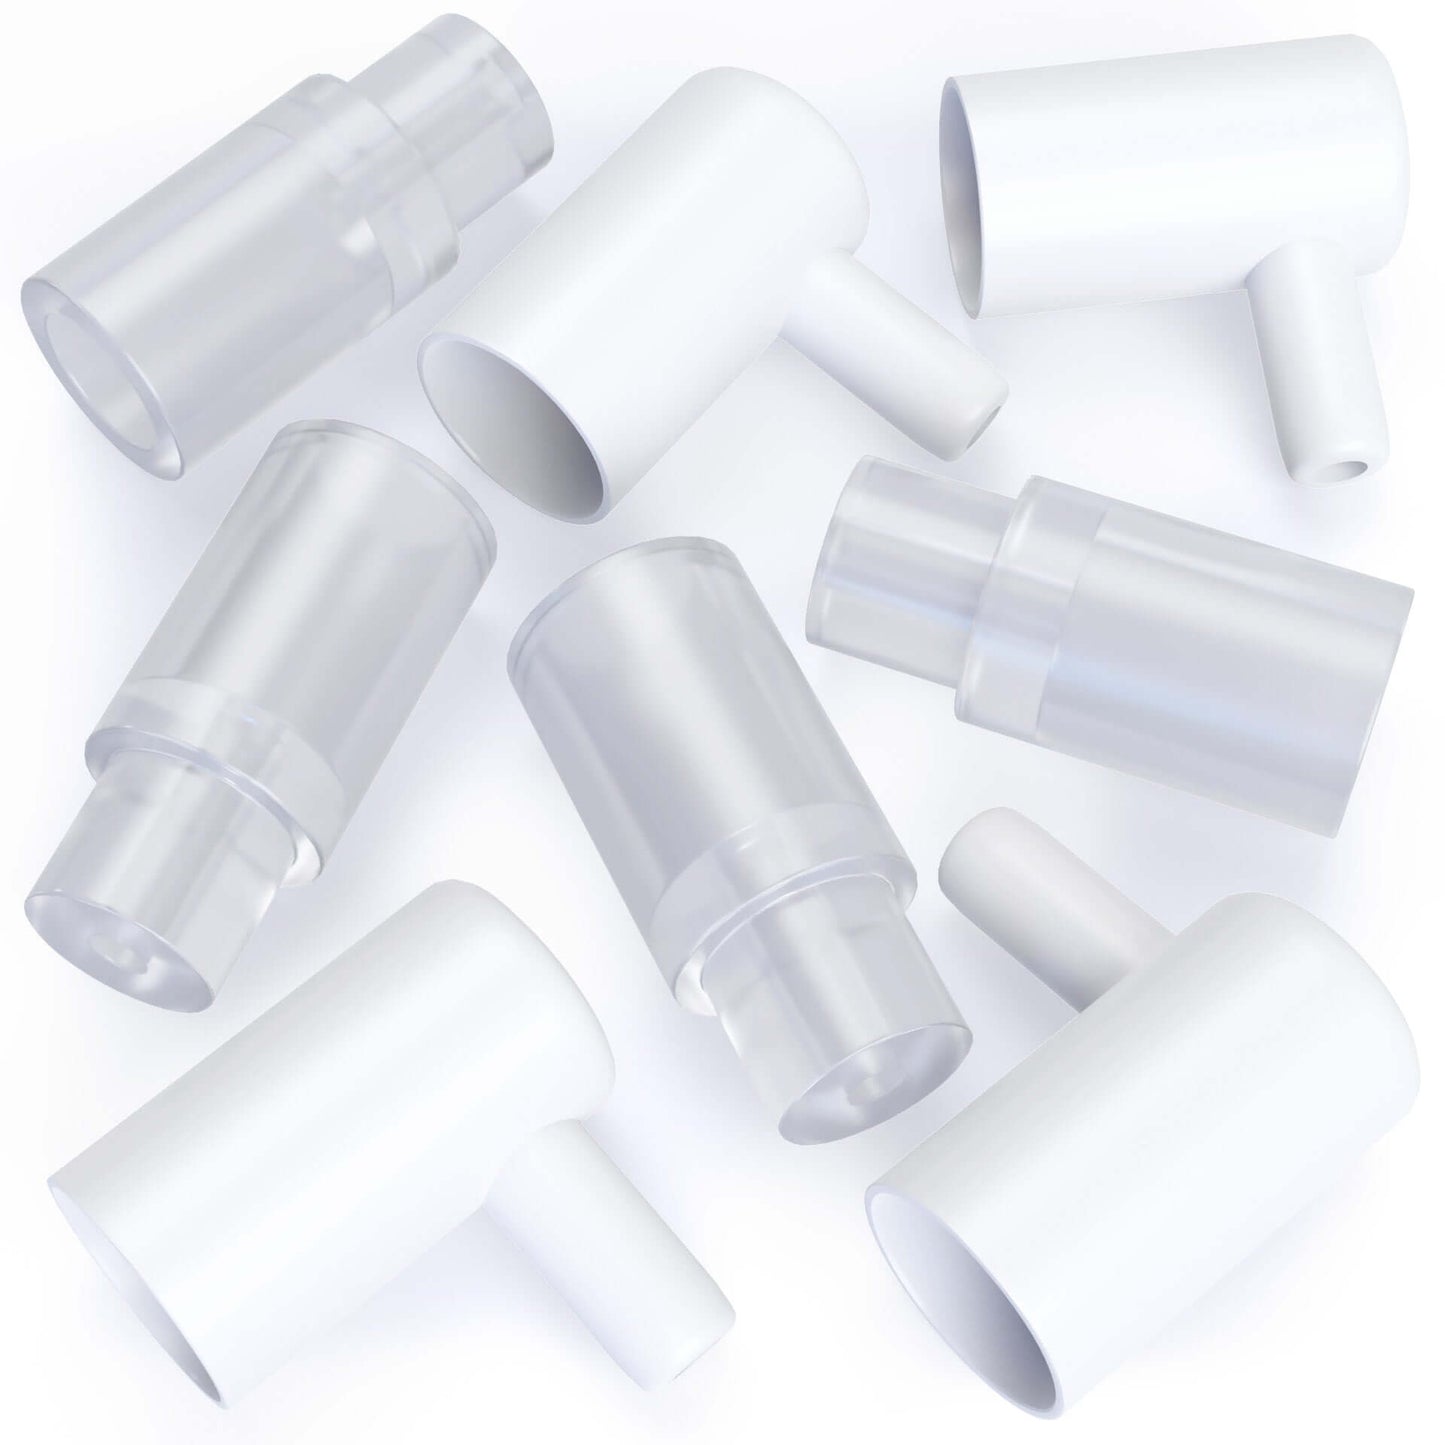 idaho jones tubing adapter as component of pump-a-collect milk collection cups